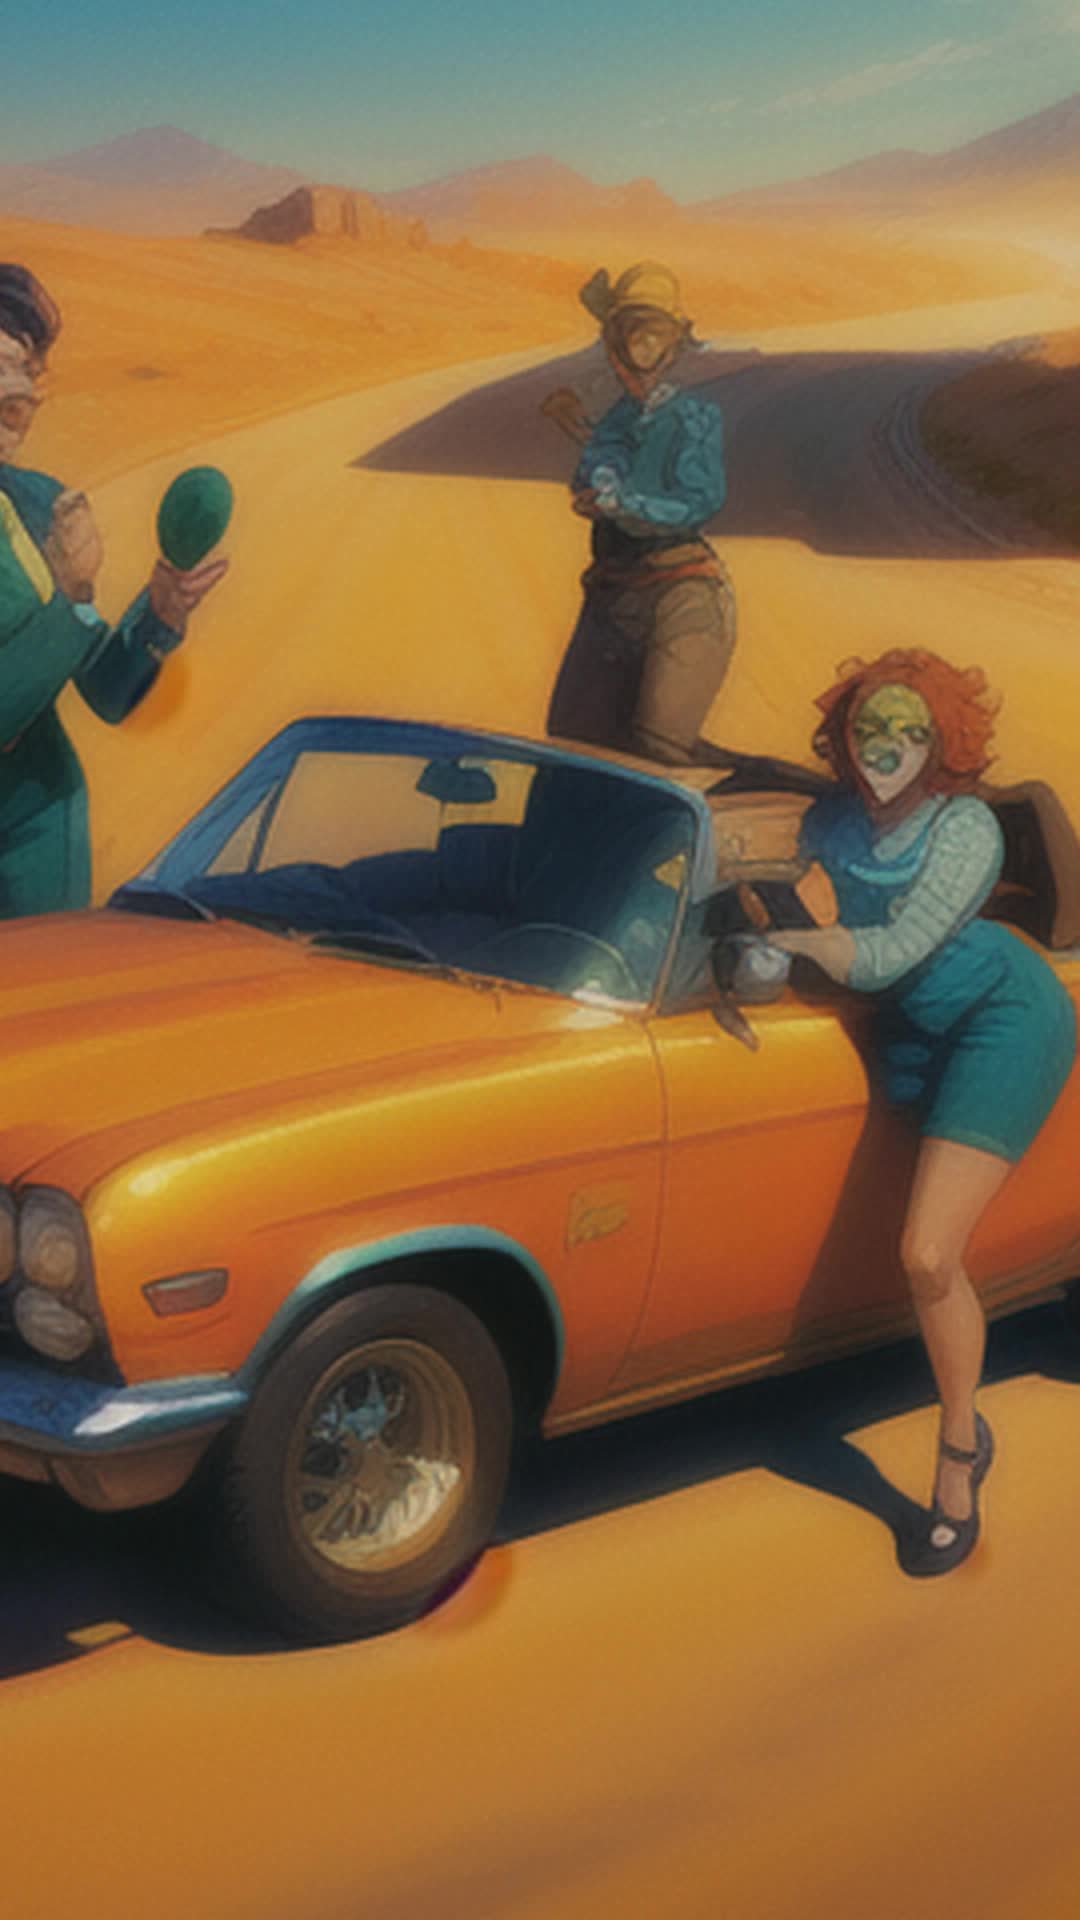 Vibrant clown girls, colorful costumes, driving vintage convertible, vast desert road, arid landscape, horizon stretching endlessly, blue sky, occasional cacti lining road, sun high in sky, soft shadows, cinematic feel, captured with wideangle lens, dust trail behind car, girls laughing and smiling, windswept hair, joyful and carefree, actionpacked, by art germ